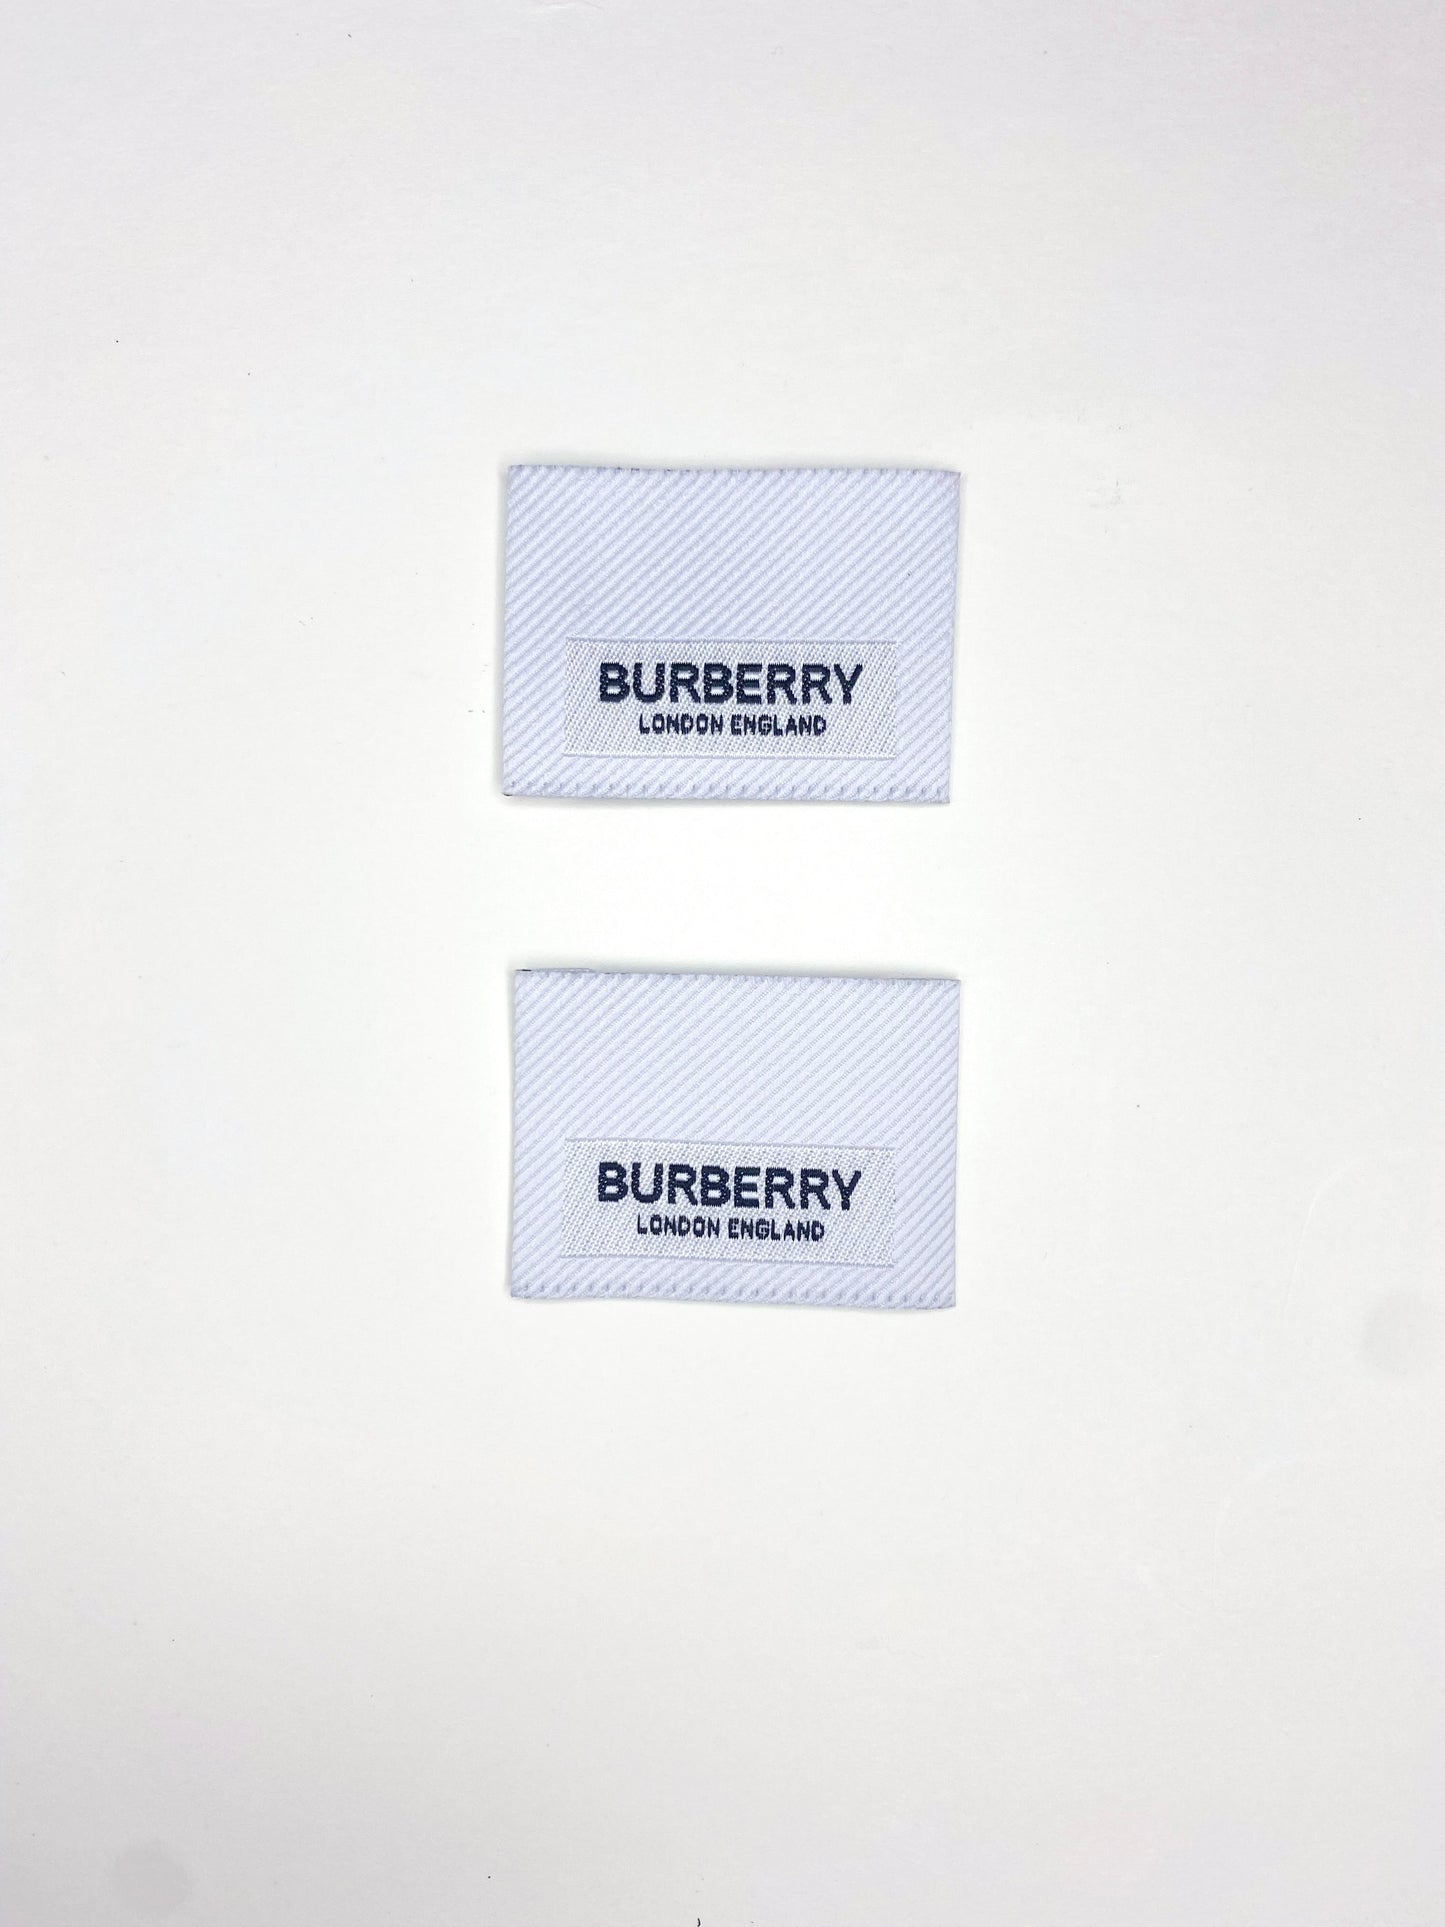 Burberry Labels For Handmade